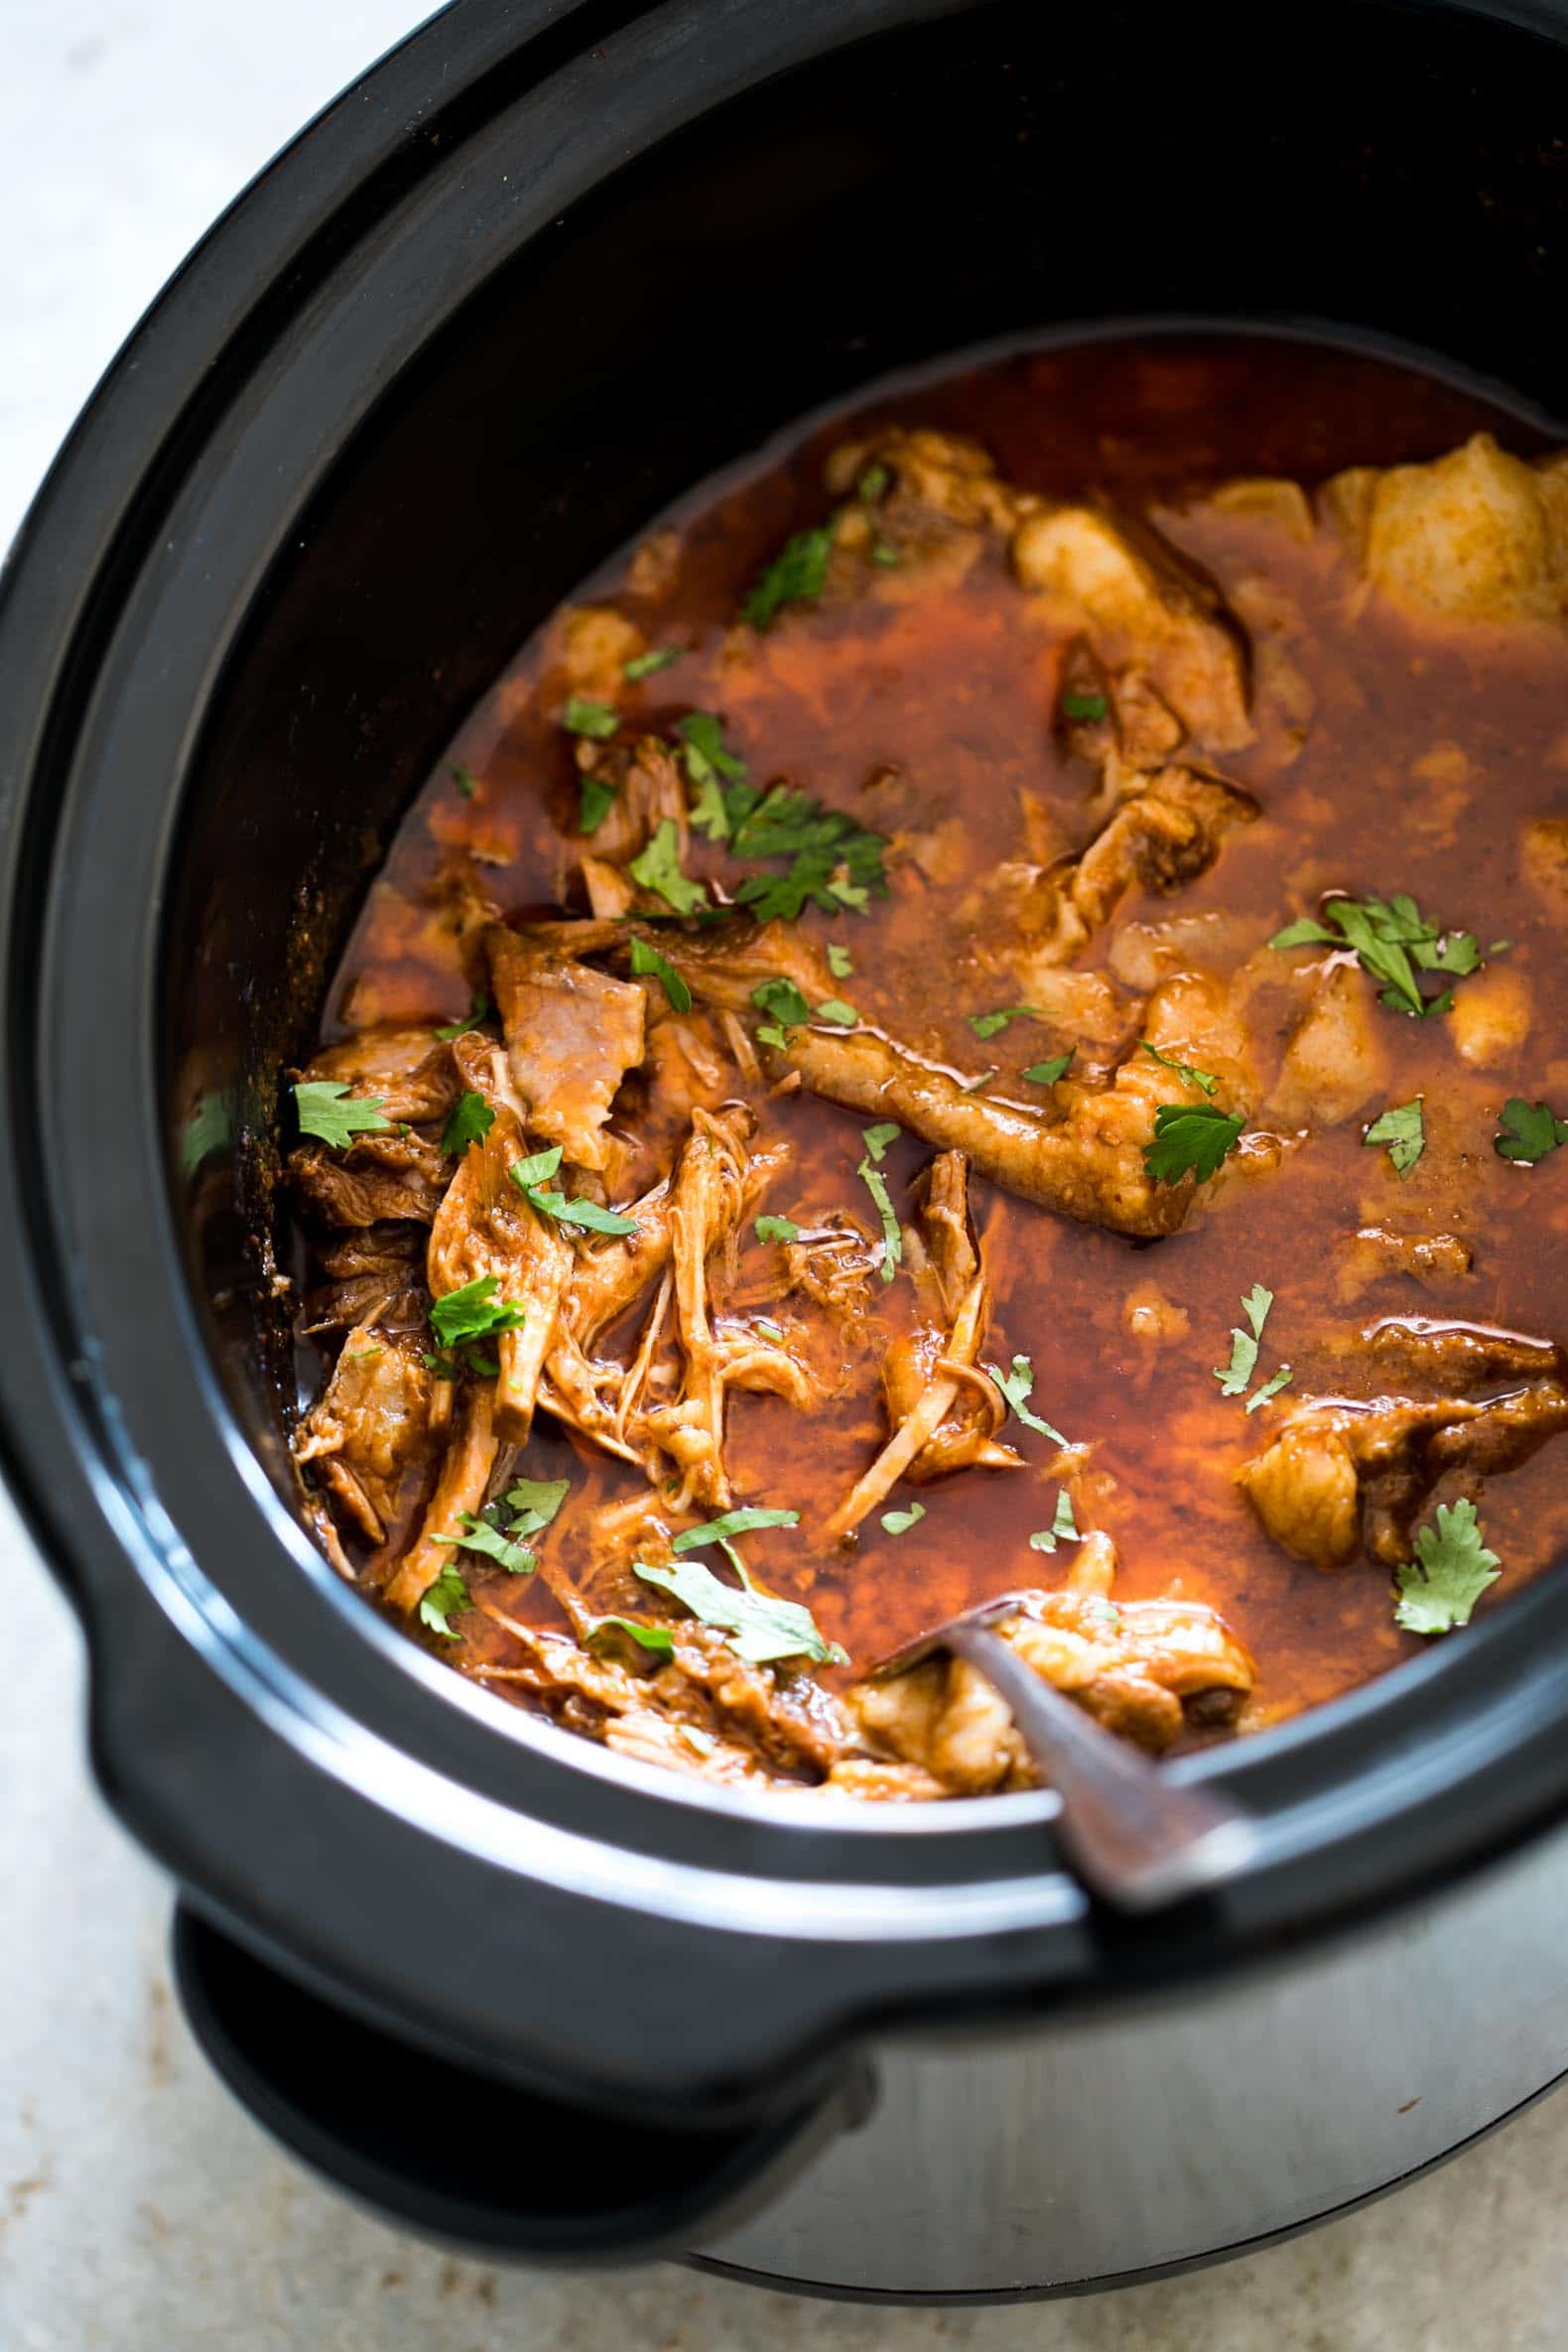 The Best Slow Cooker Chipotle Bbq Pulled Pork My Food Story,Transplanting Orchids